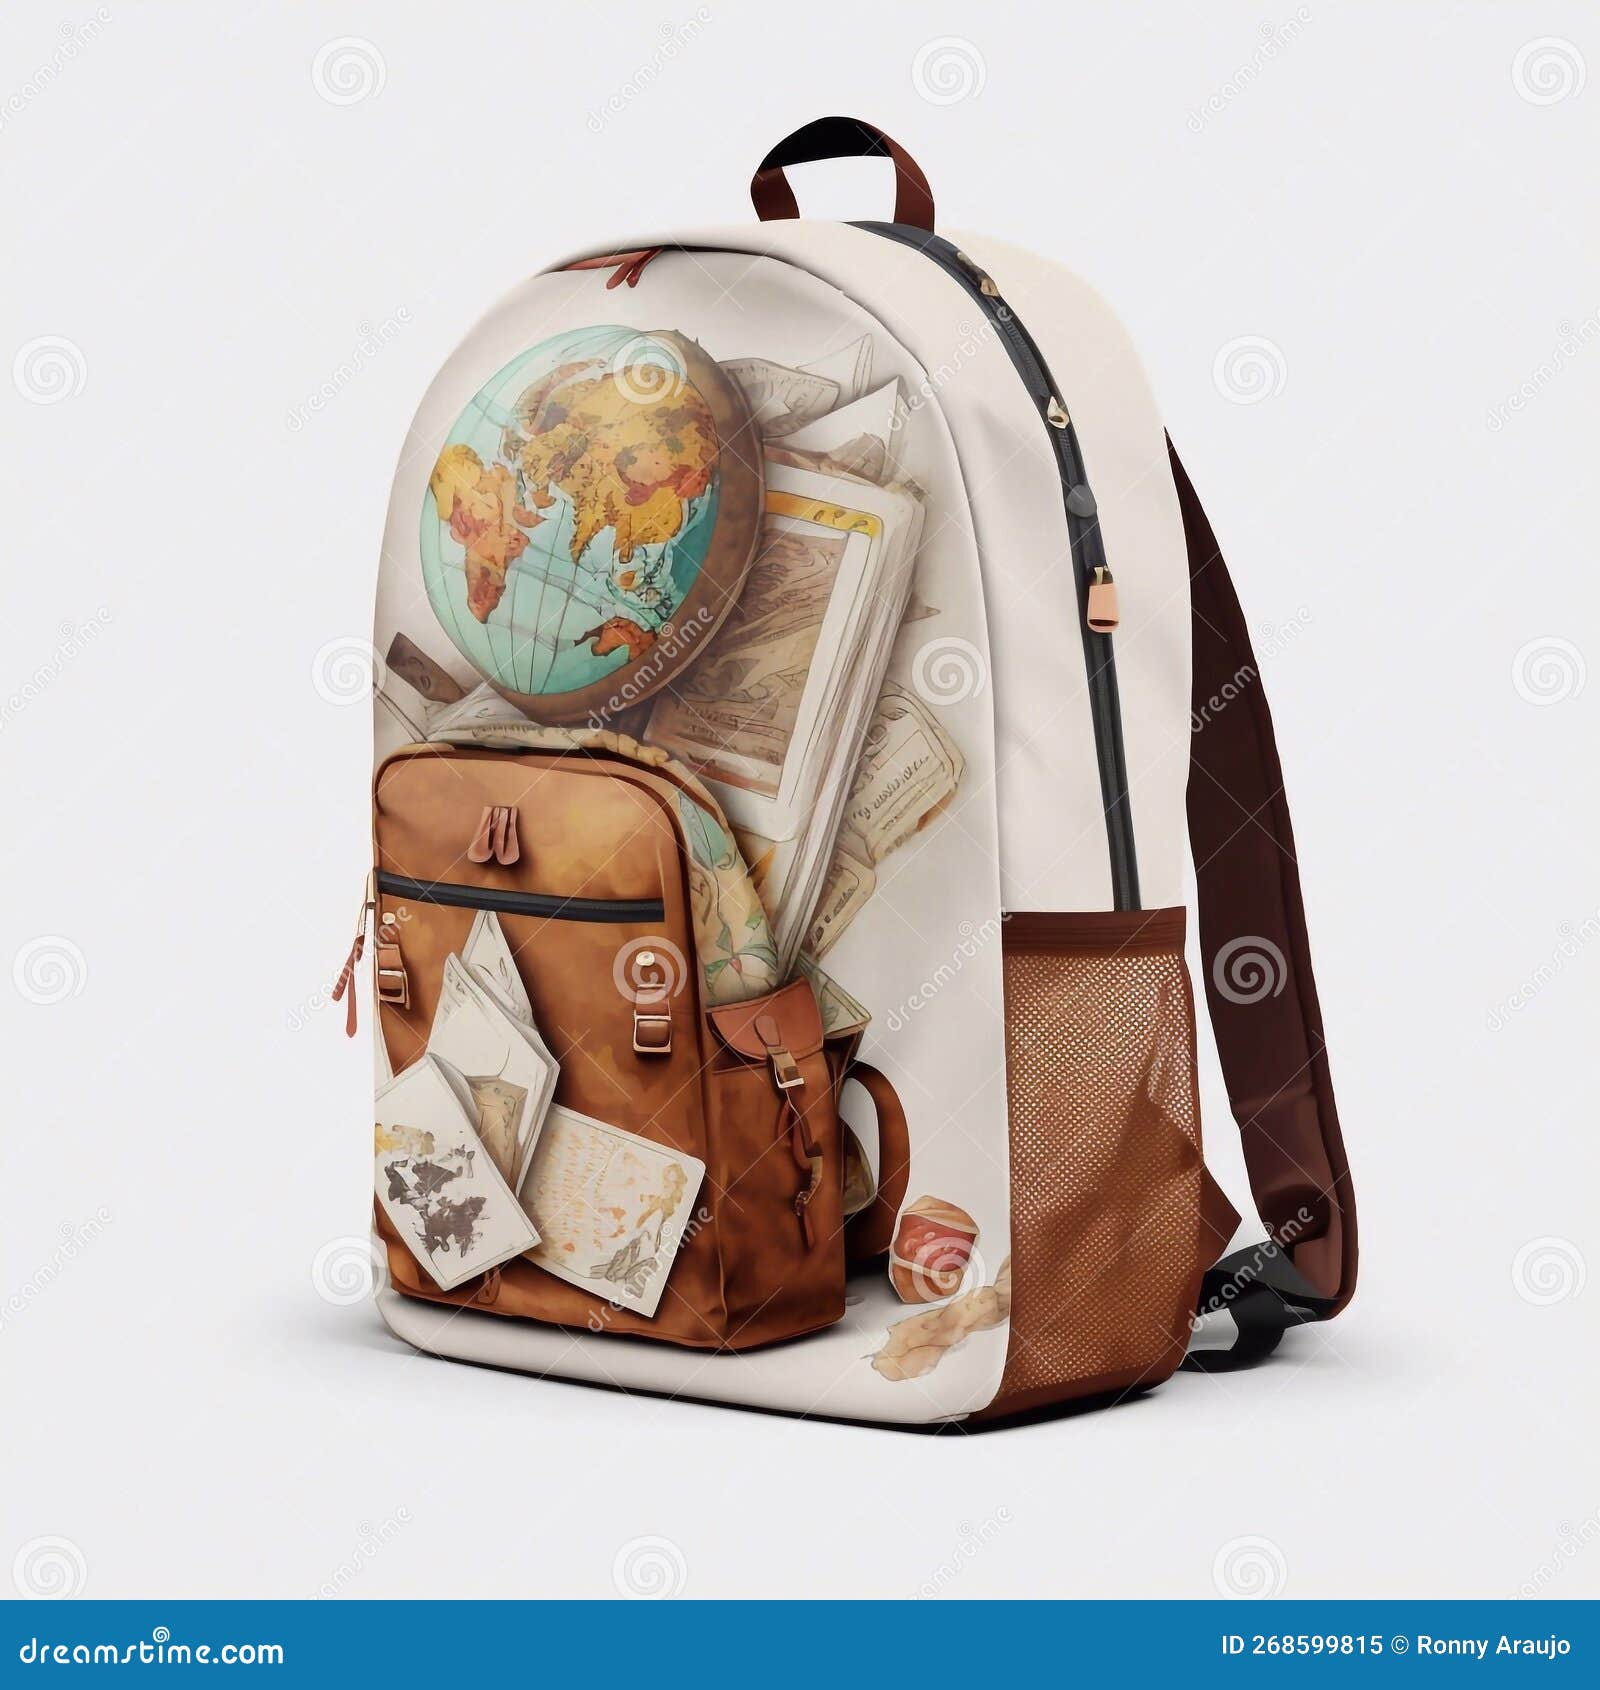 travel backpack theme